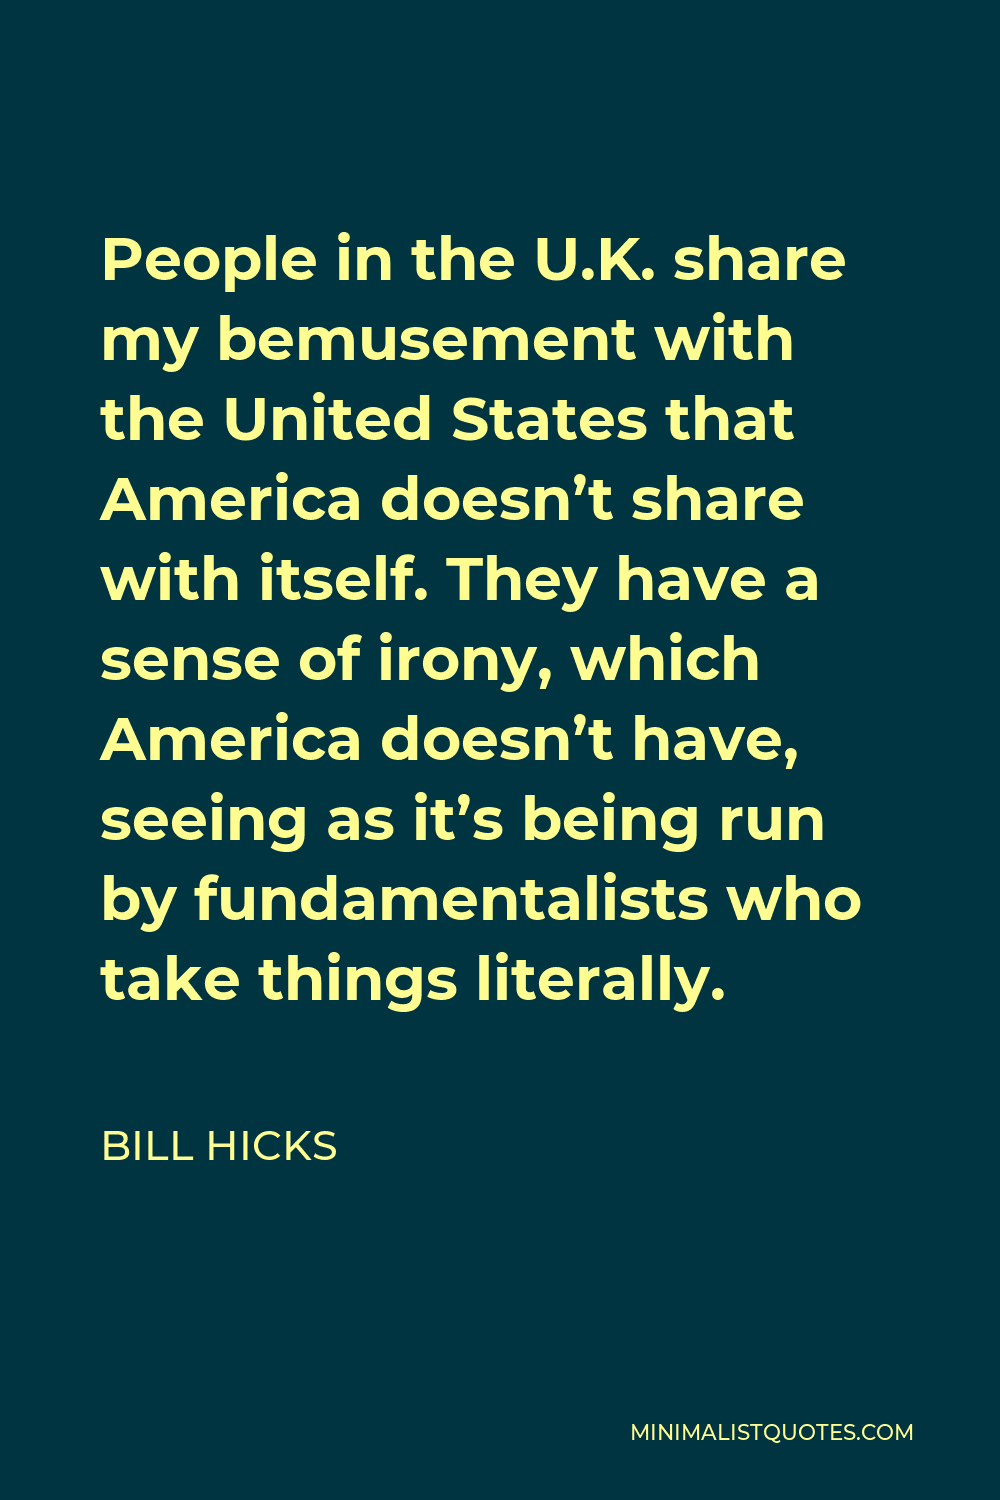 Bill Hicks Quote - People in the U.K. share my bemusement with the United States that America doesn’t share with itself. They have a sense of irony, which America doesn’t have, seeing as it’s being run by fundamentalists who take things literally.